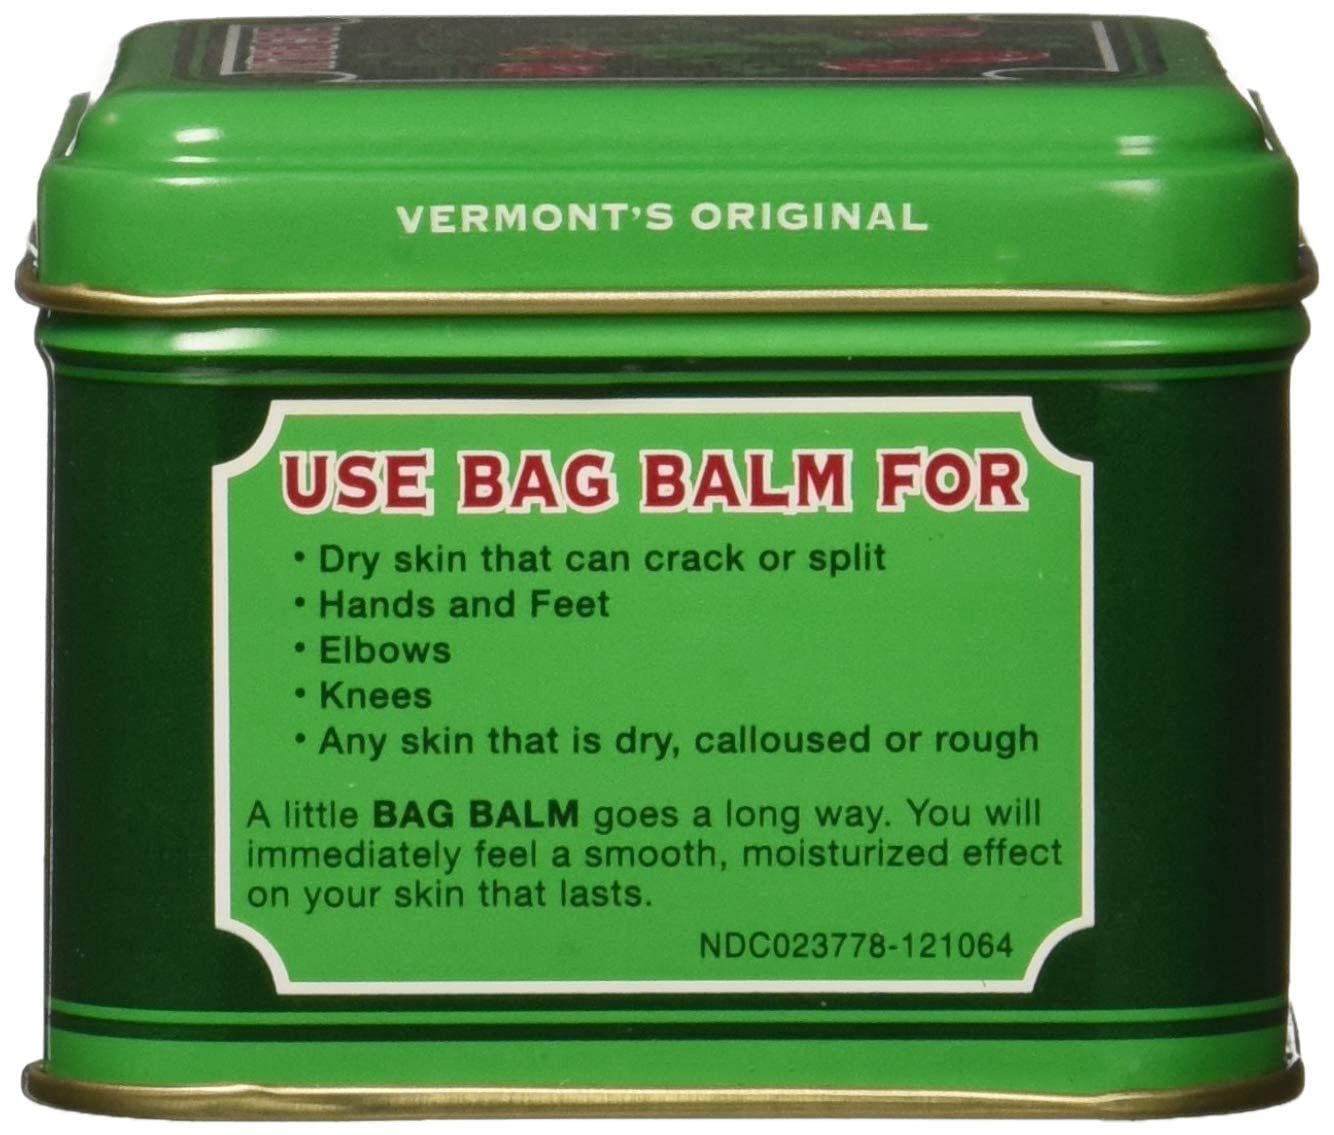 Bag Balm Vermont's Original Hand Moisturizer, Hand Balm for Dry Skin, Cracked Hands, Heels & Dry Hands Treatment, For Dogs and More Ointment, Dry Skin Lotion - 4oz Tin, 1 Pack